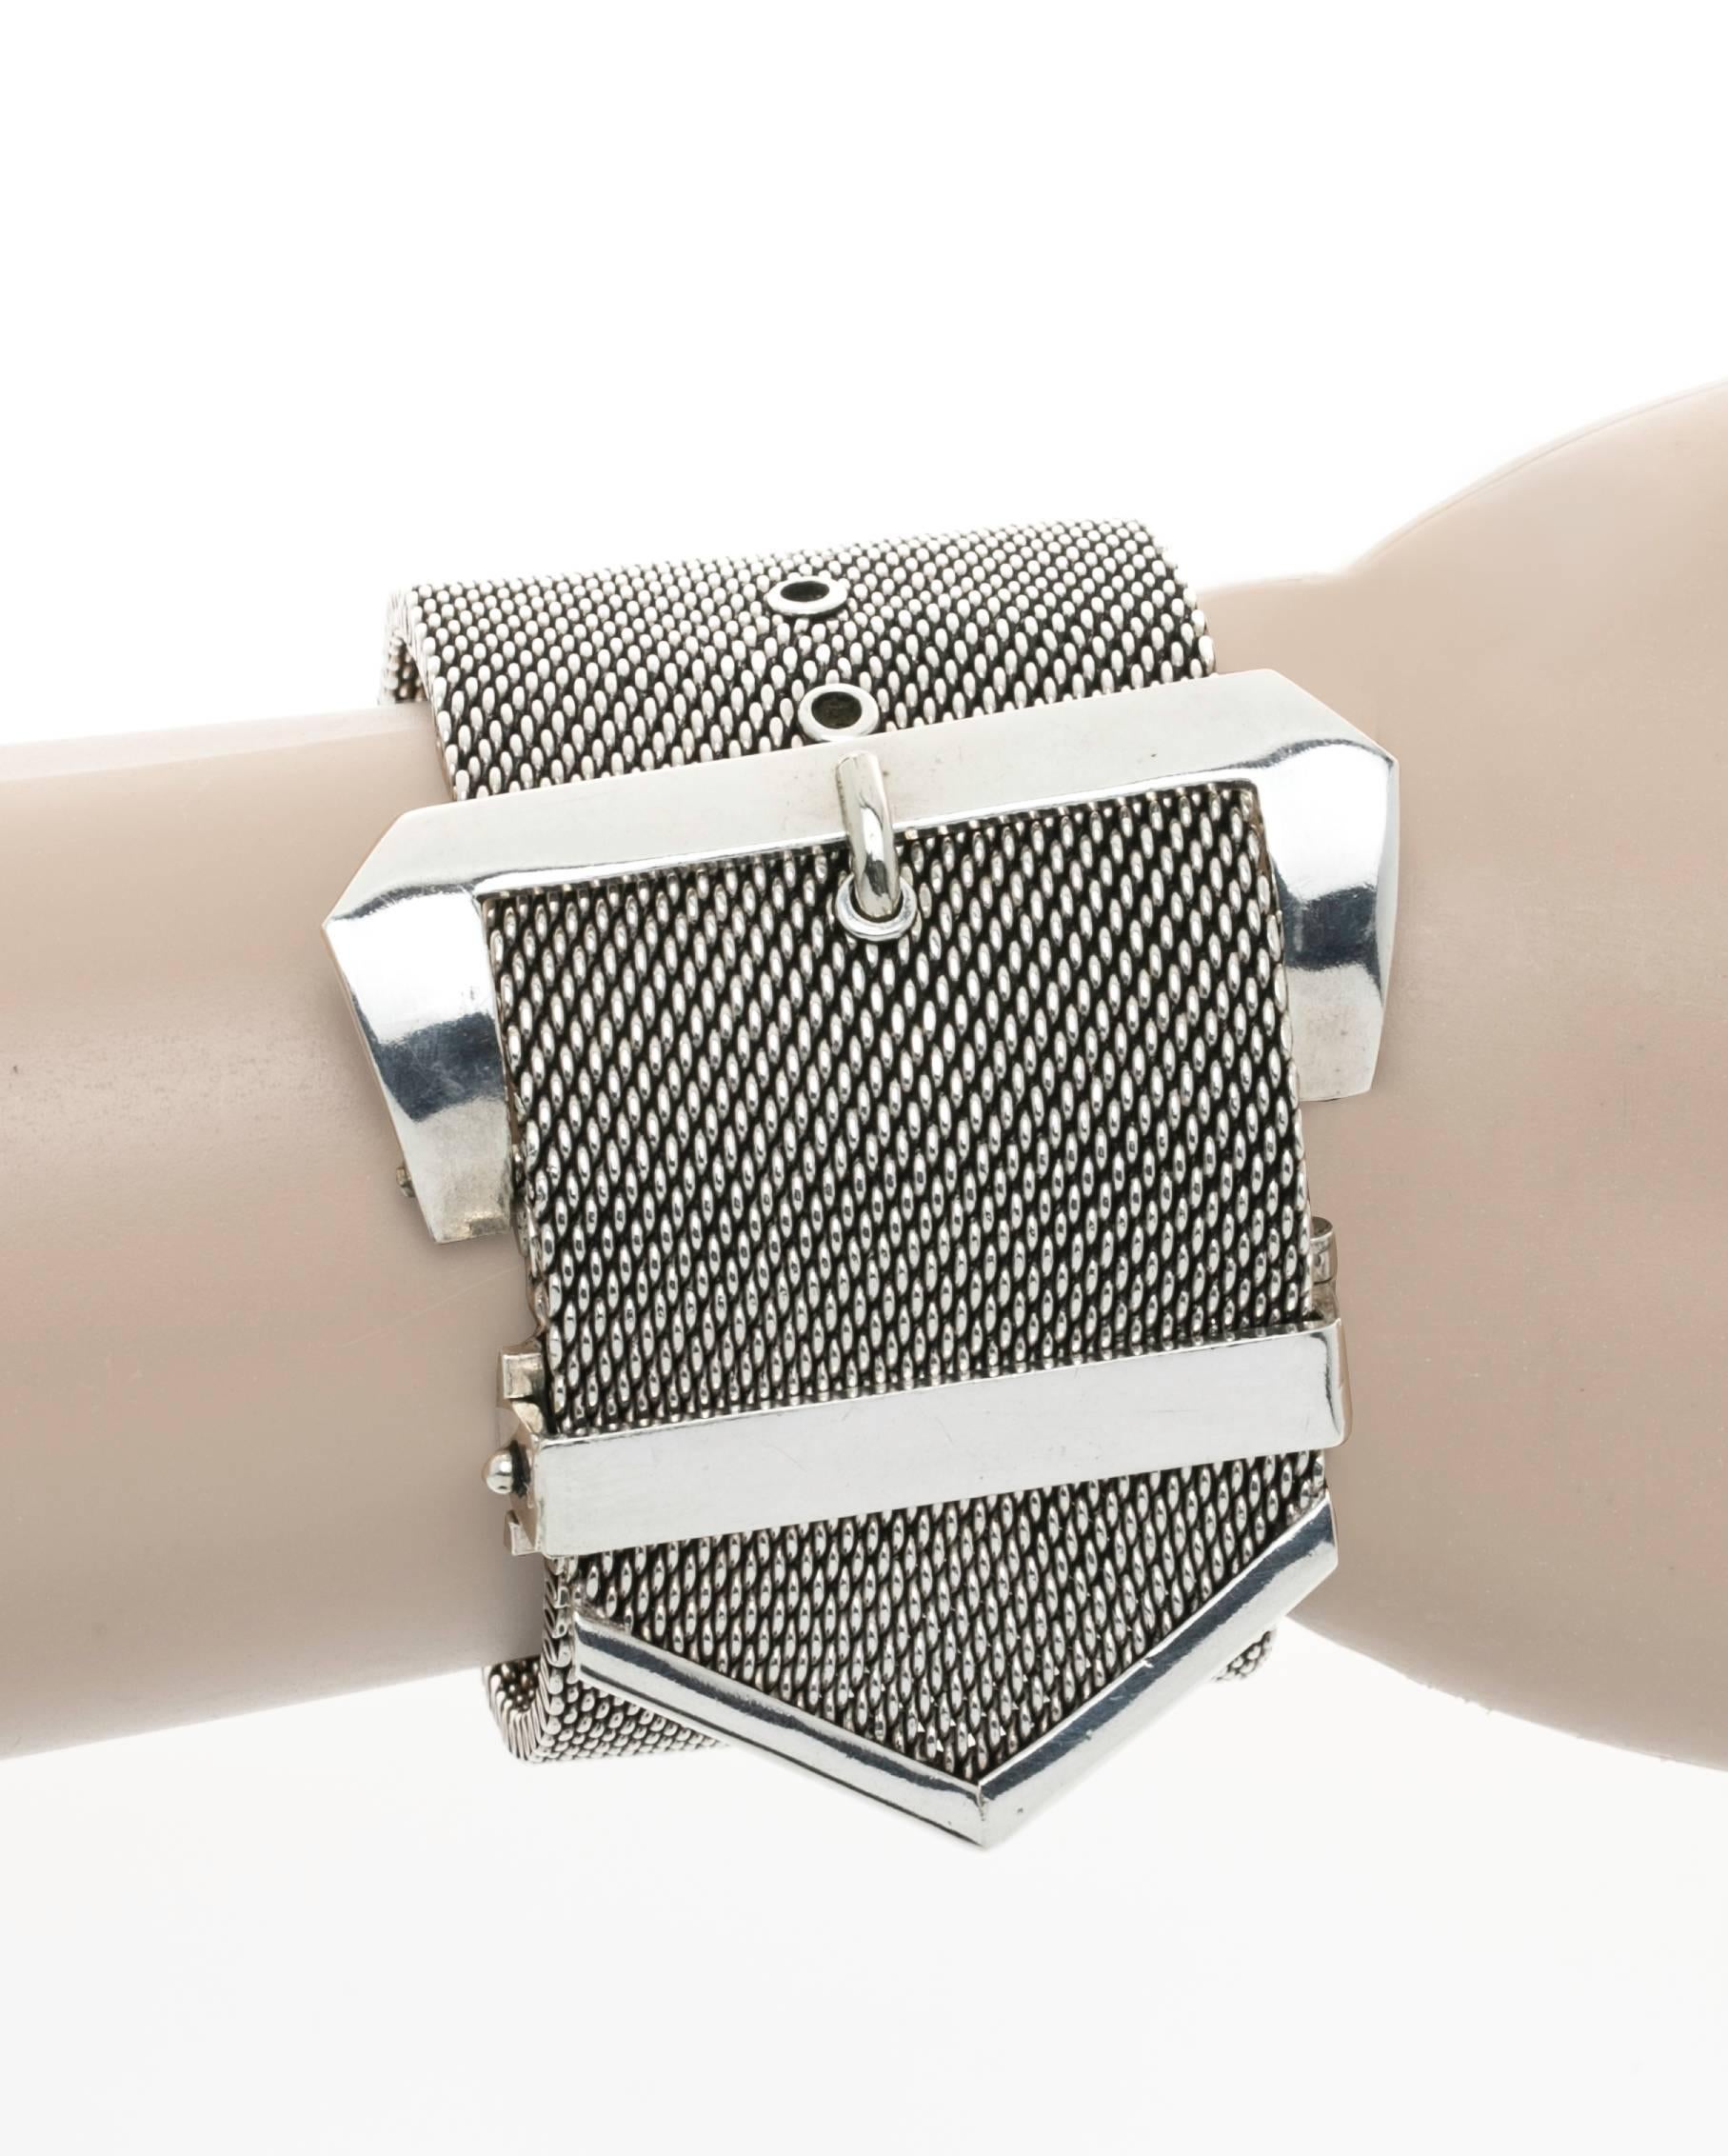 Dramatic heavy Sterling silver mesh style buckle bracelet.   Hinged safety closure. The band is about 1/8" thick.